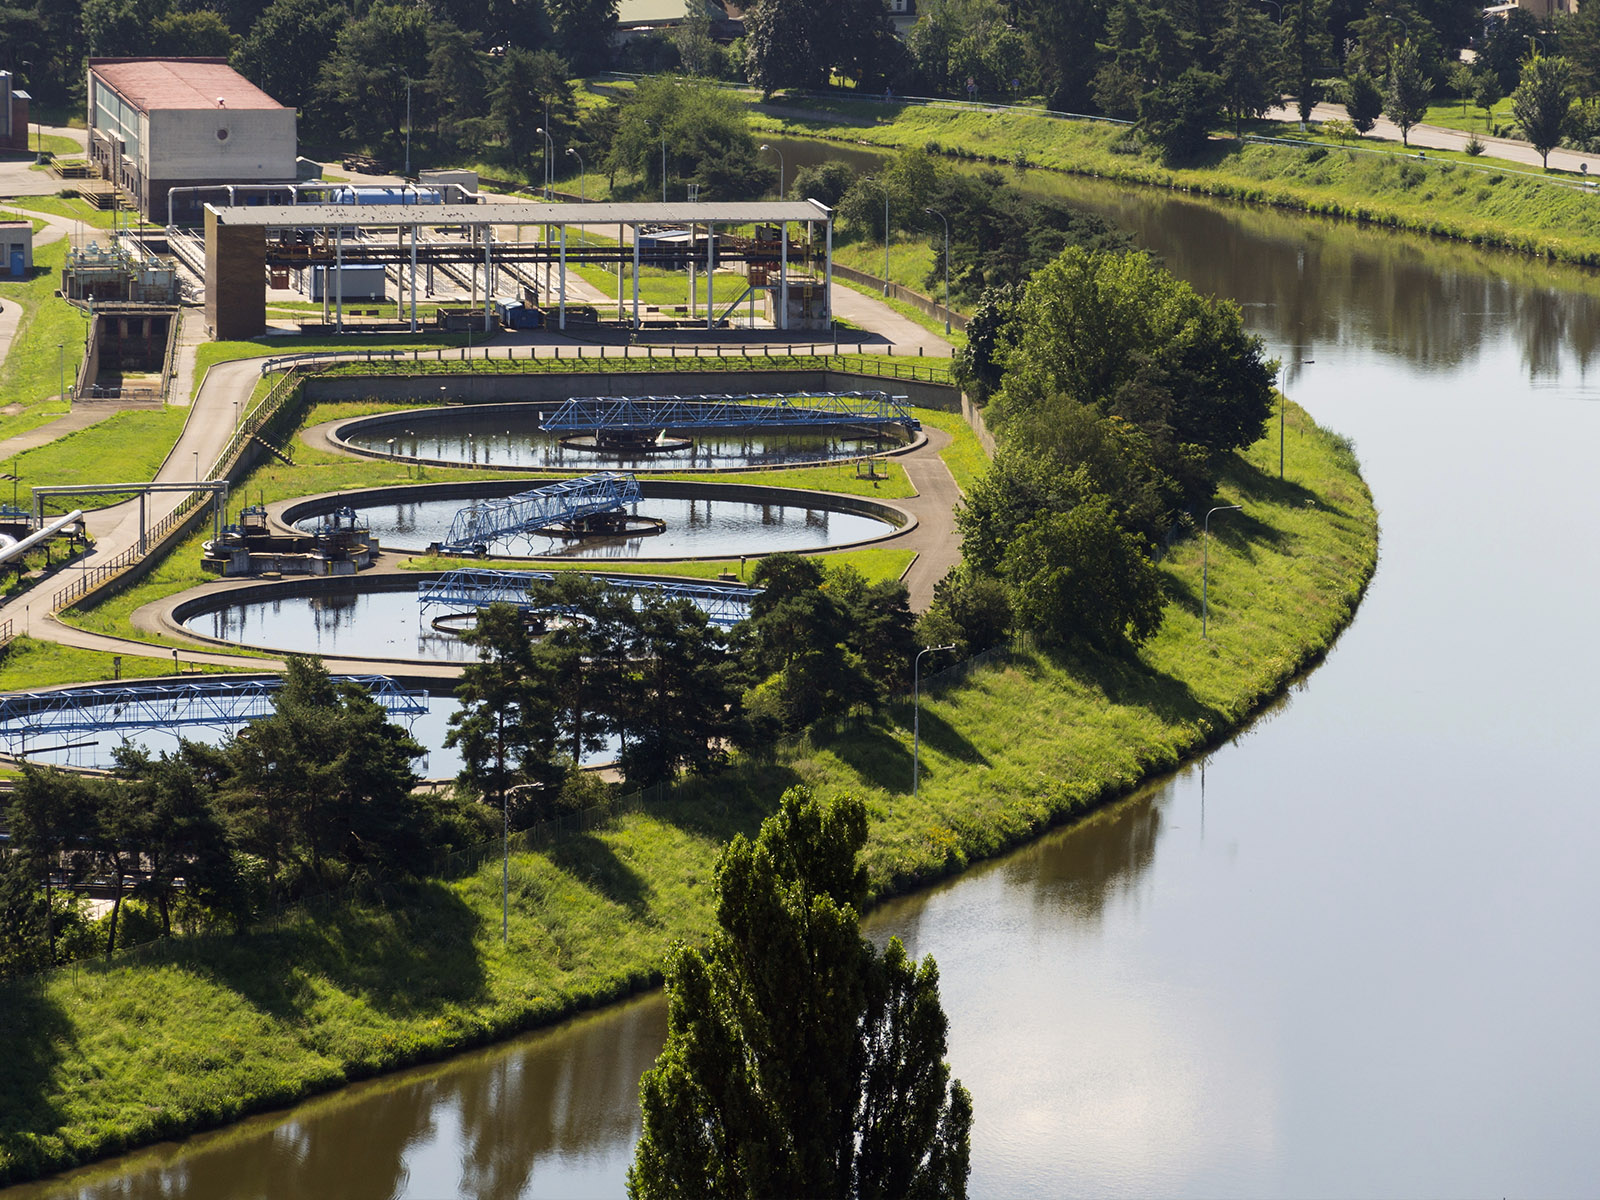 Photograph of a water treatment plant on a river